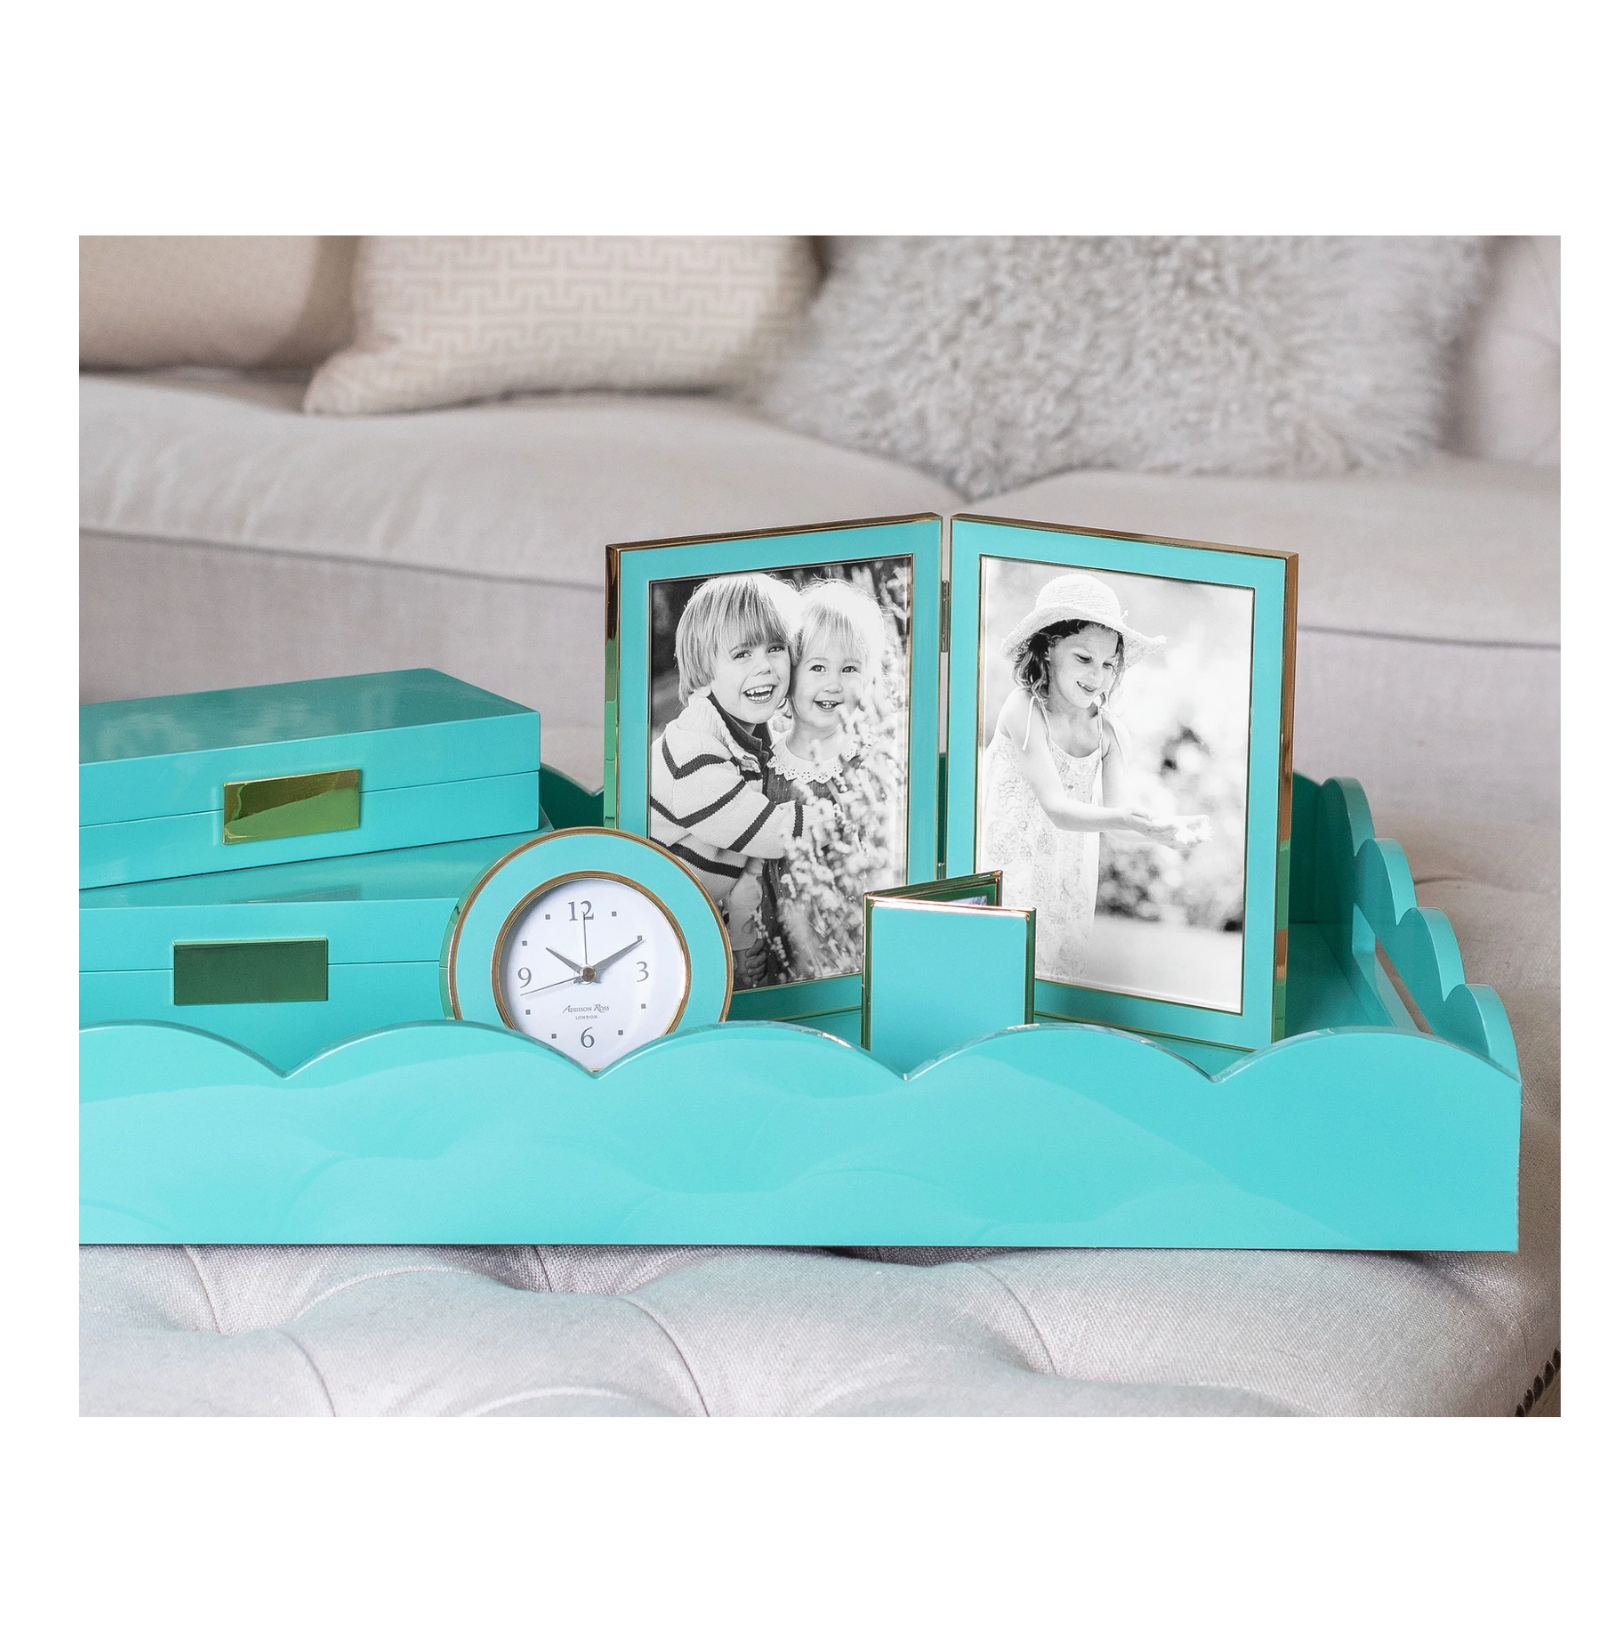 Turquoise Enamel Alarm Clock with Gold Plate accents